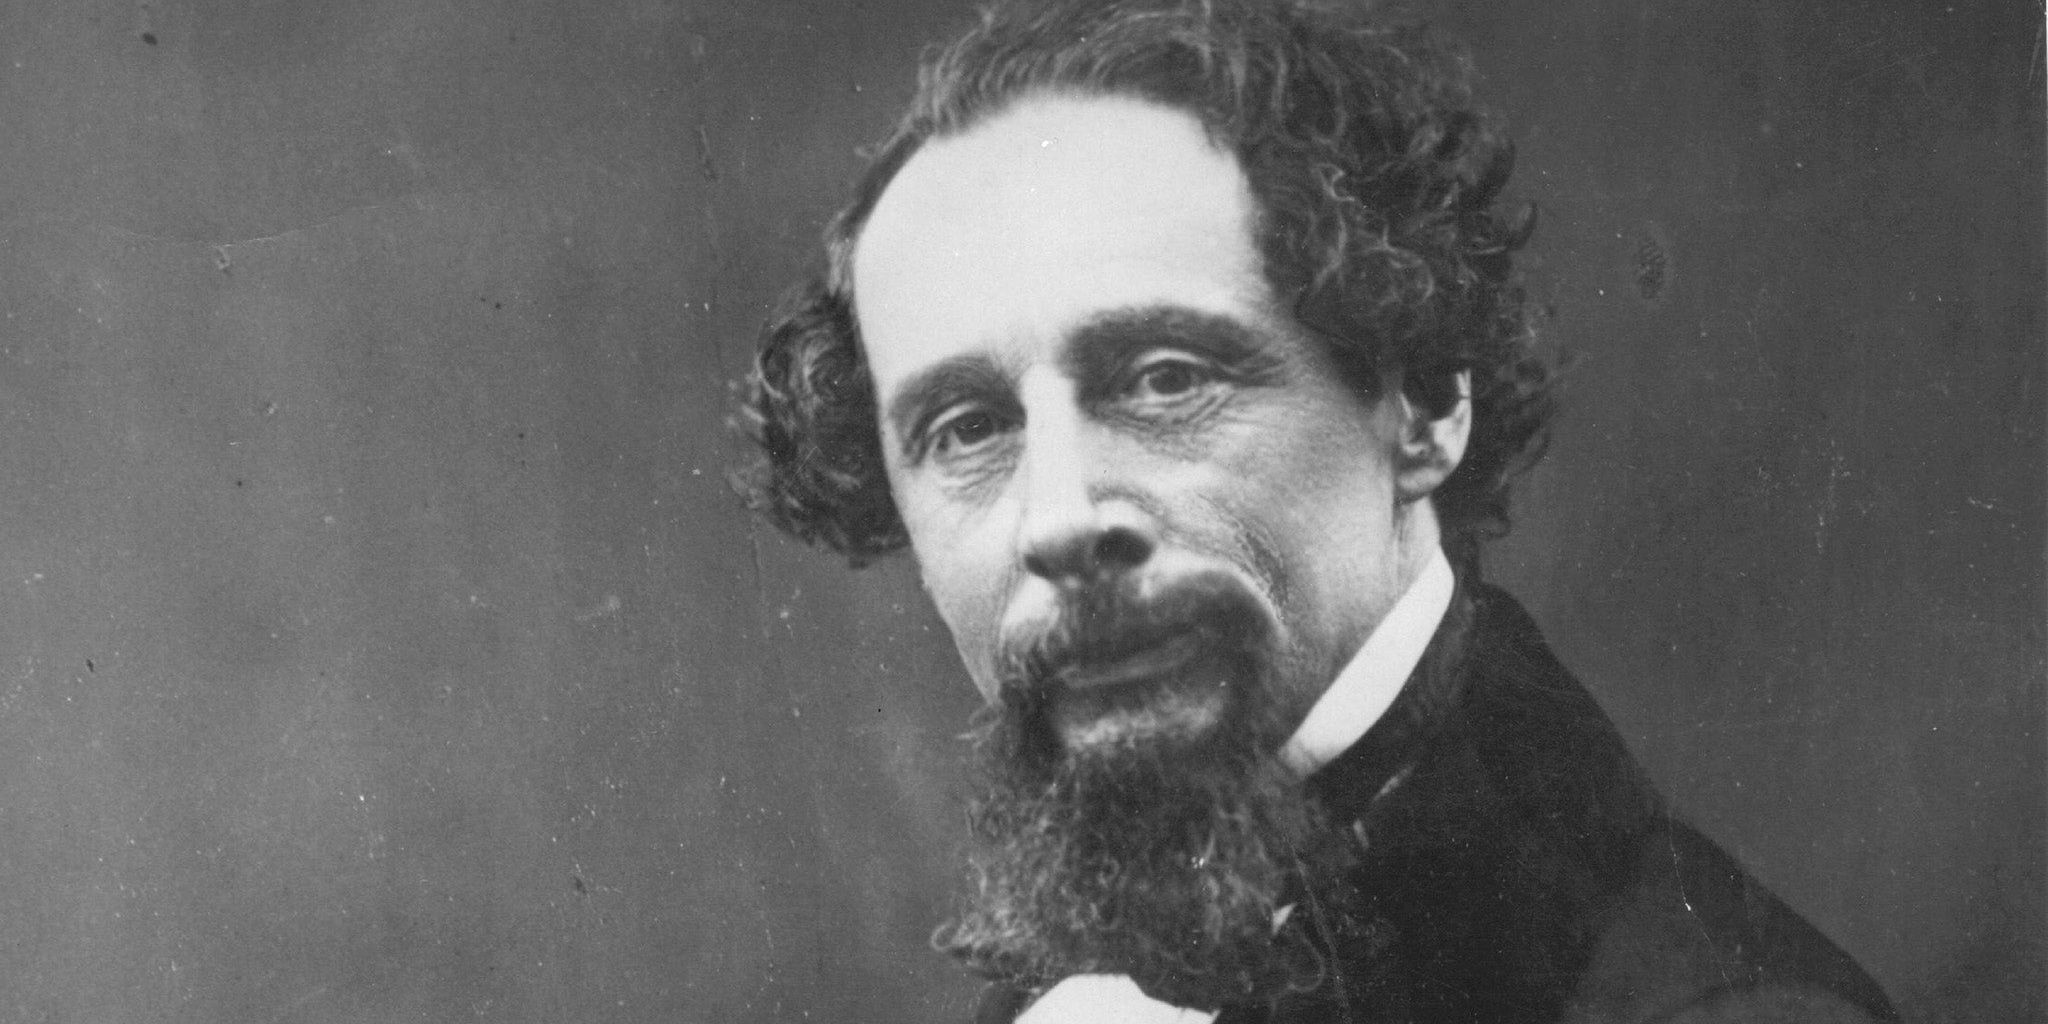 A photo of Charles Dickens